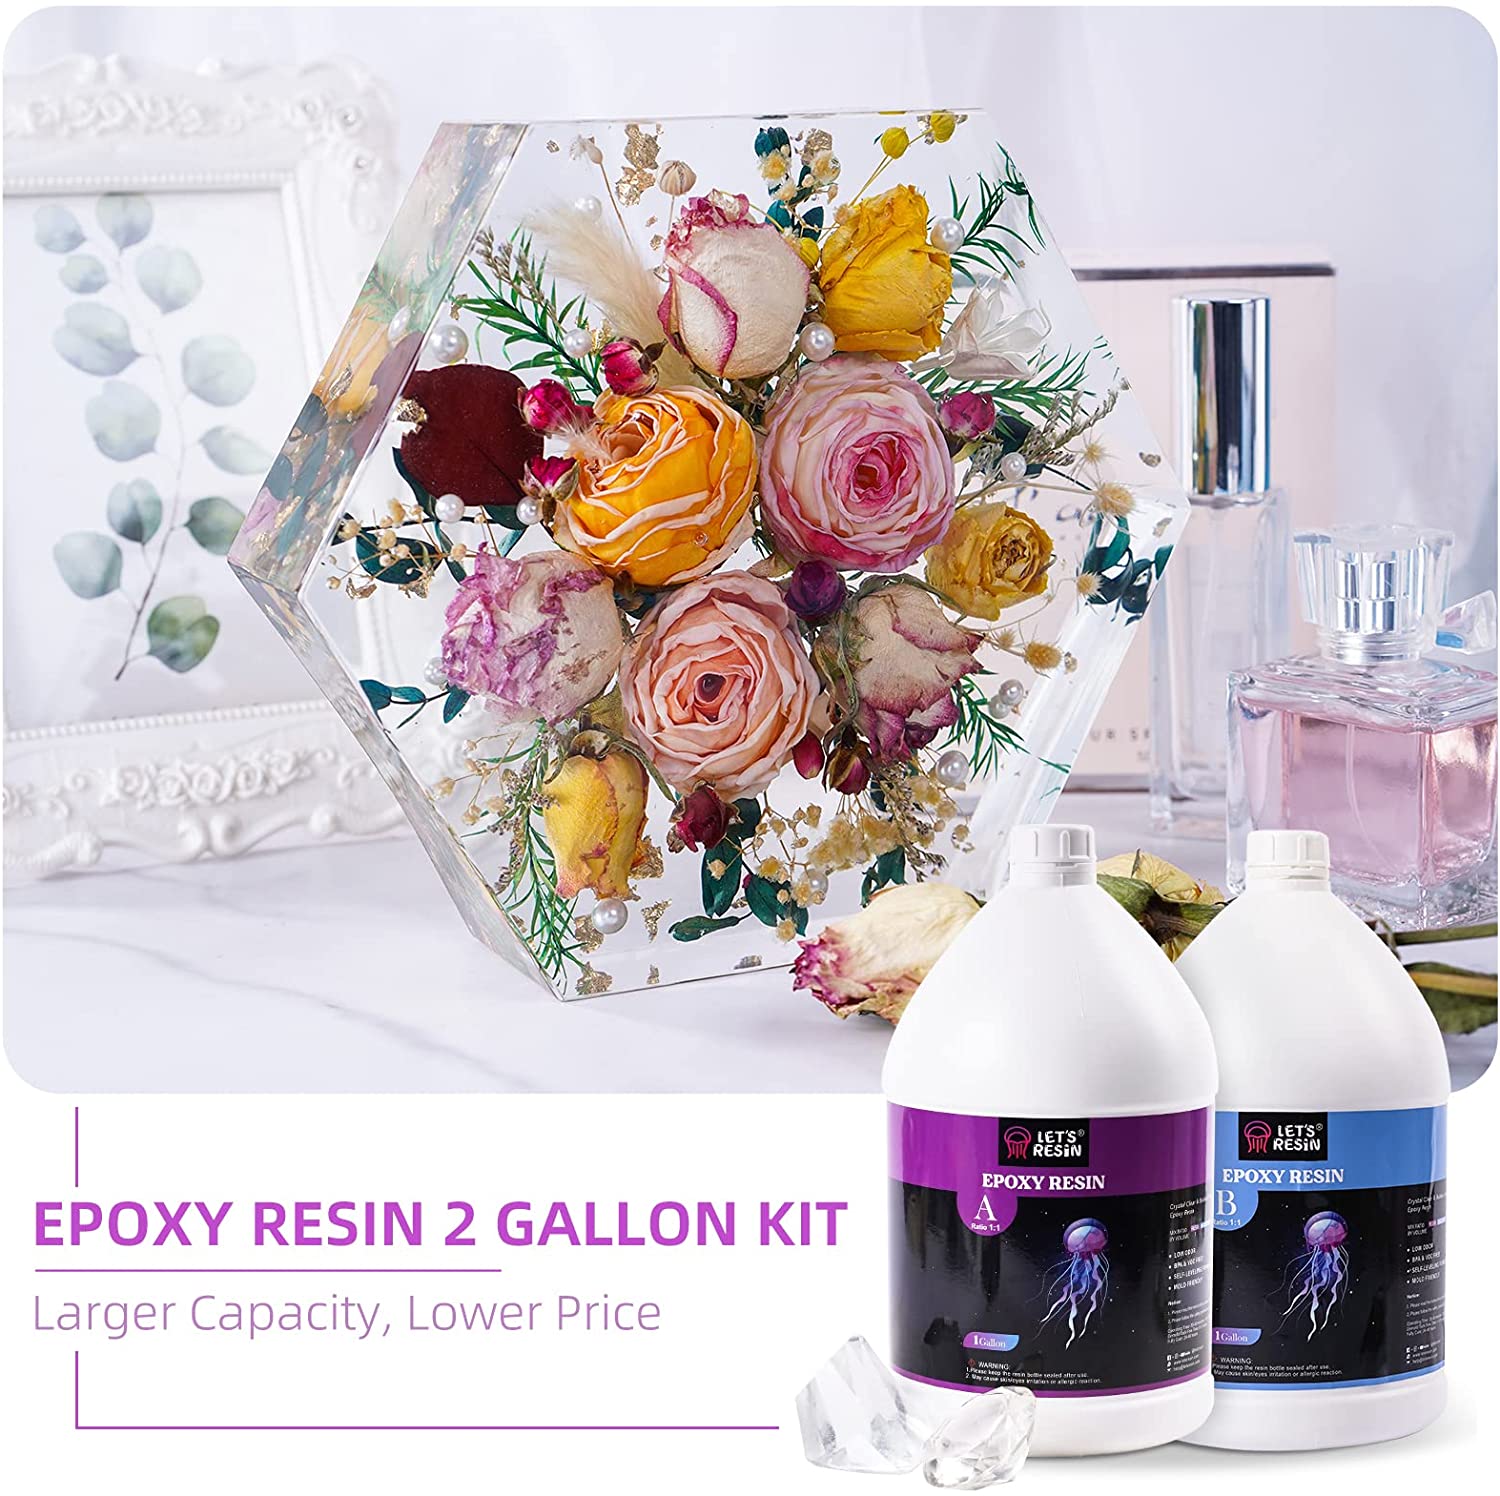 Let's Resin Epoxy Resin Kit, 2 Gallon Deep Pour Epoxy Resin,Bubble Free &  Crystal Clear Casting Resin,Fast Curing Resin for Table Top, Countertop